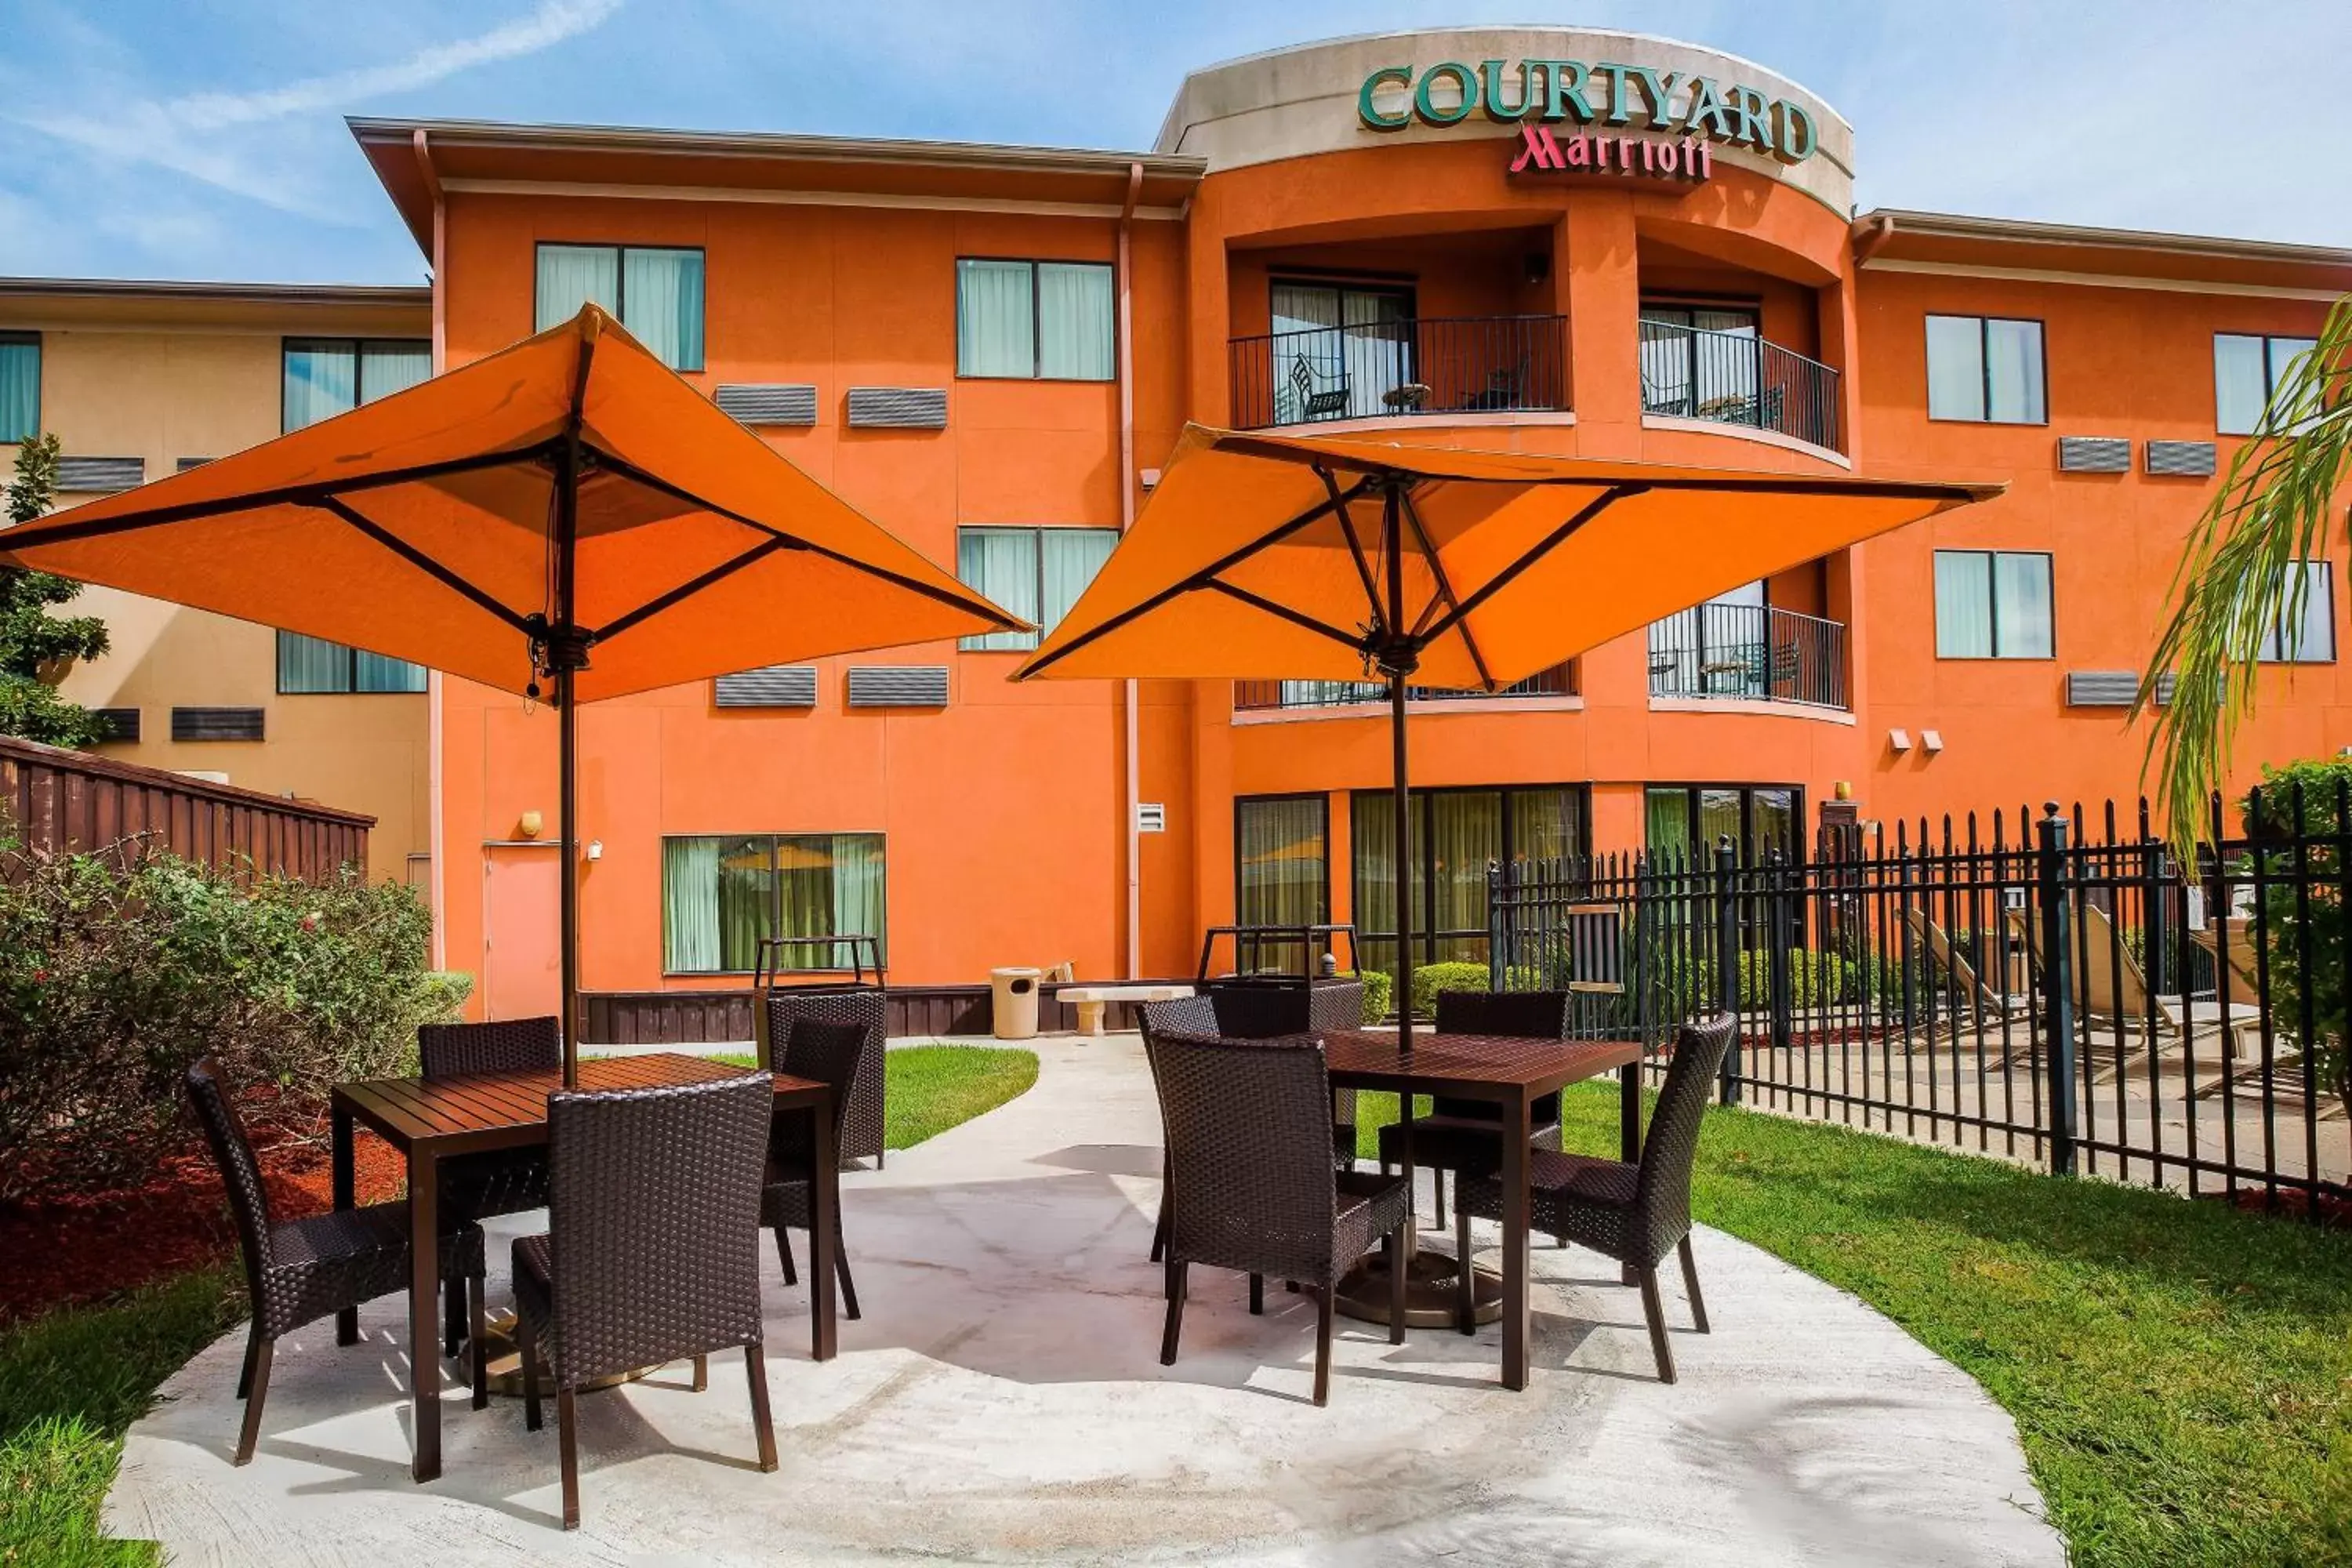 Property Building in Courtyard by Marriott Corpus Christi